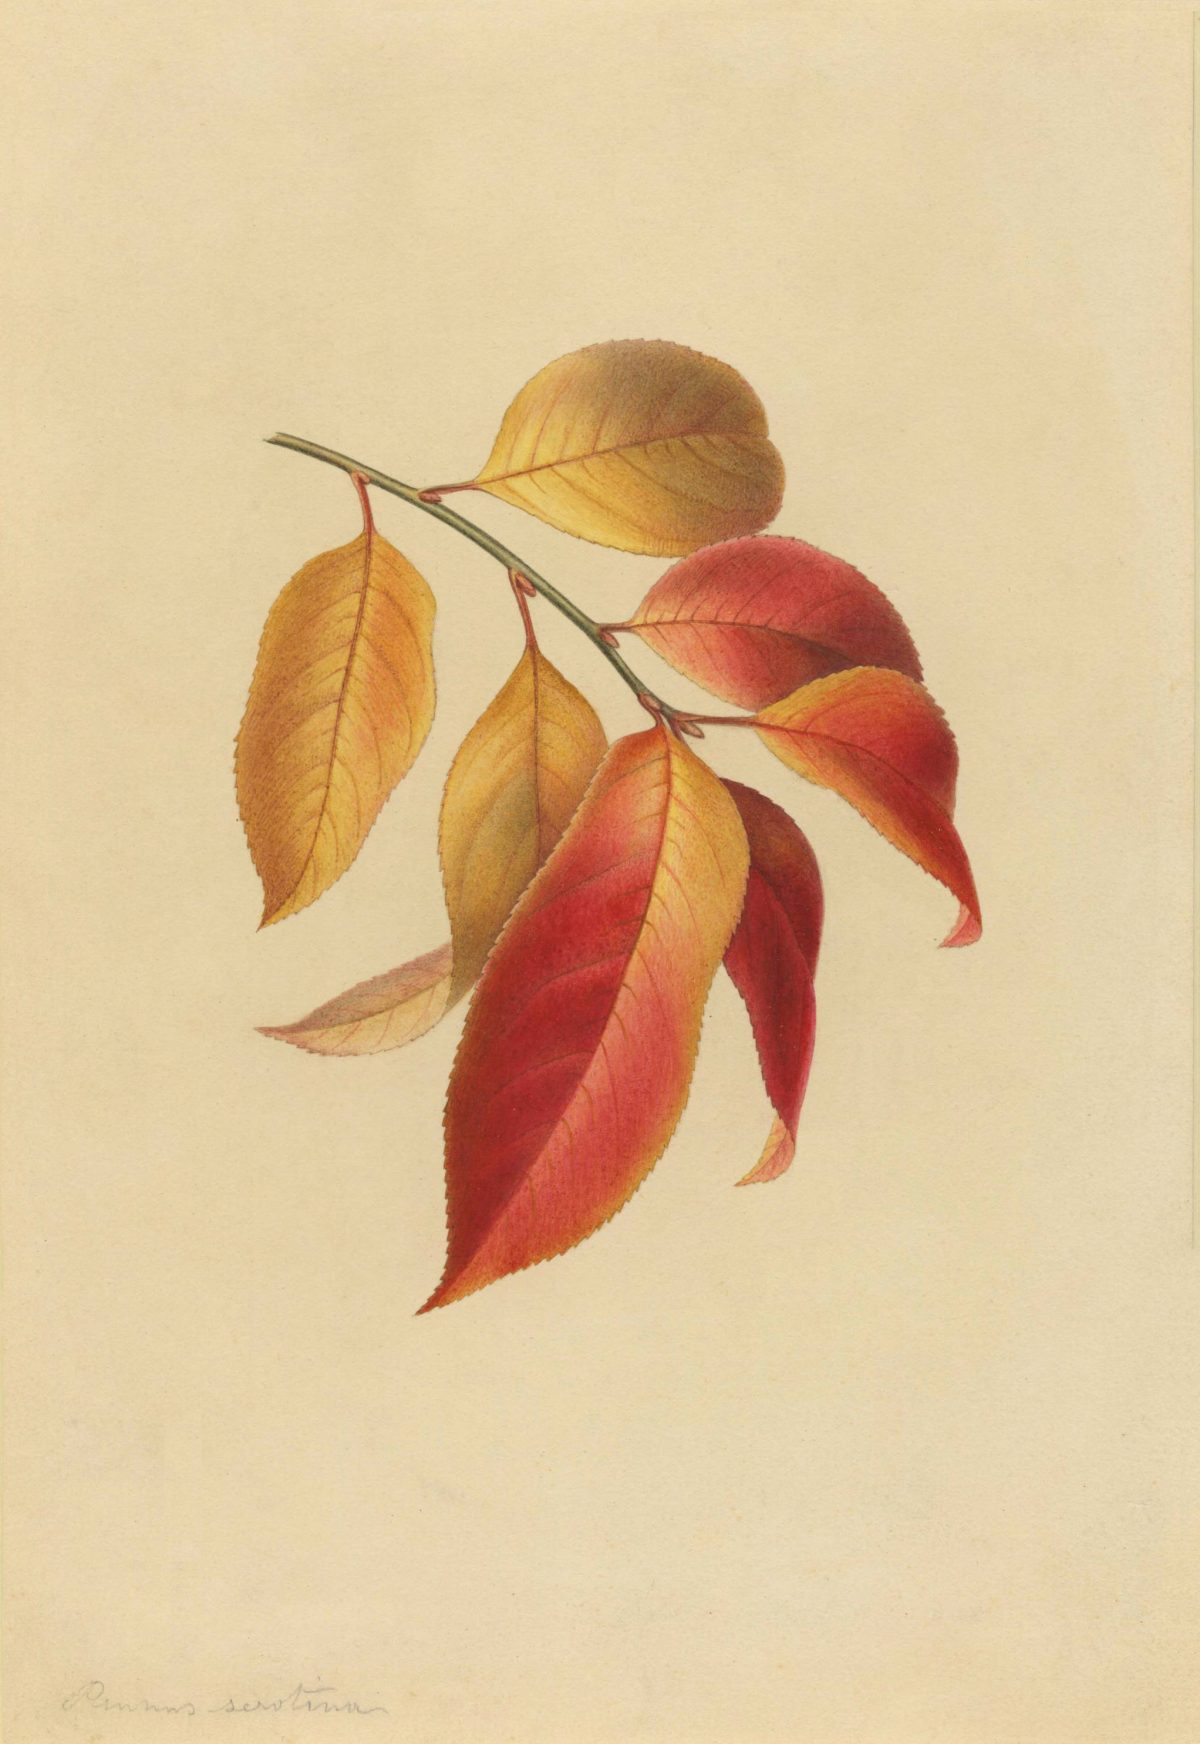 Prunus serotina "A branch of the black cherry tree is depicted with seven leaves in autumn color"